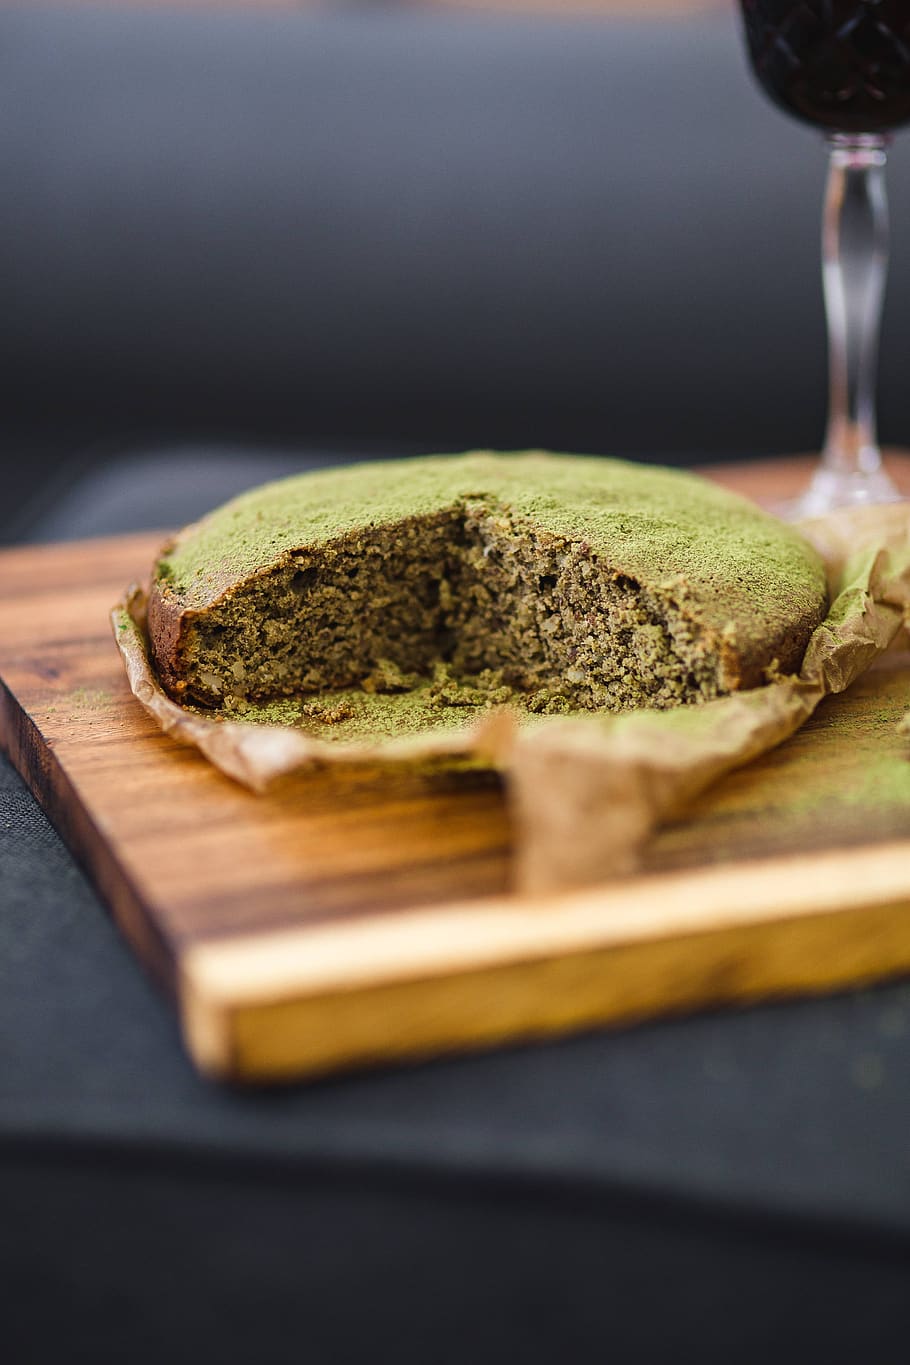 cake, gluten, homemade, wooden, baking, pastry, hygge, board, matcha, Delicious